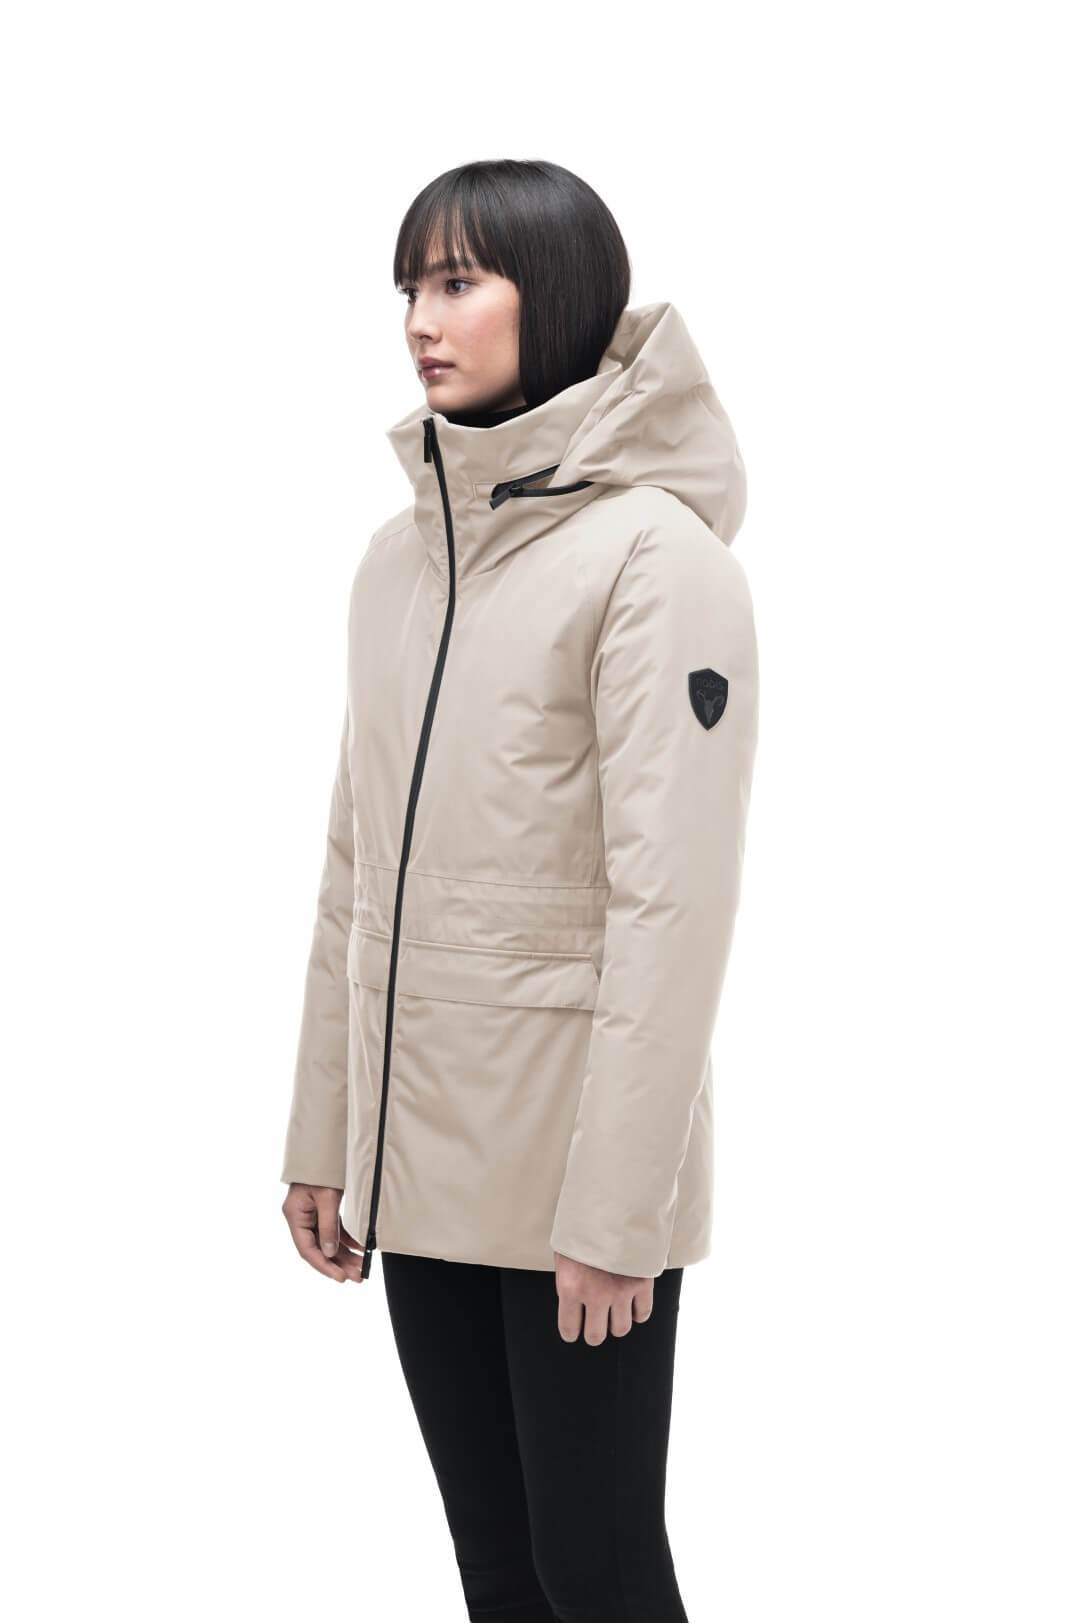 Litho Ladies Short Parka in hip length, Canadian duck down insulation, tuckable waterproof hood, and two-way zipper, in Clay